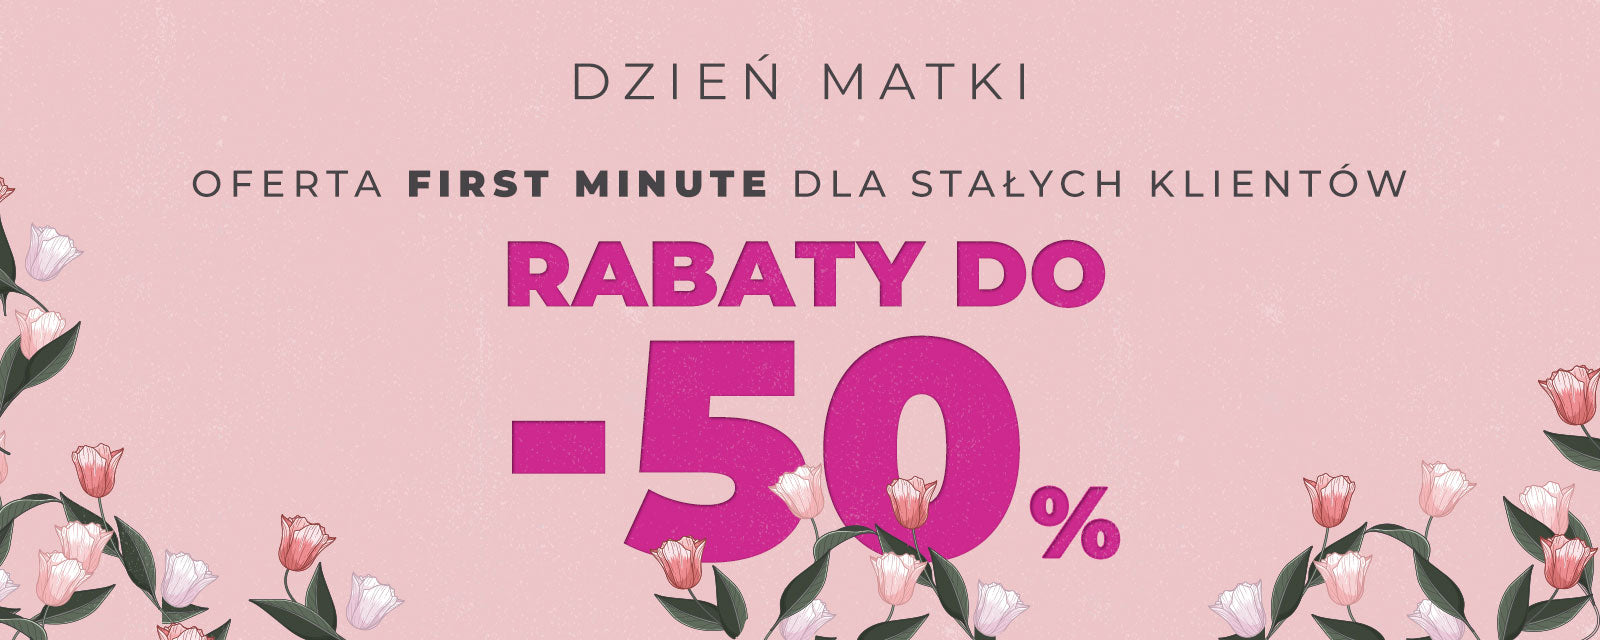 First minute - rabaty do -50%